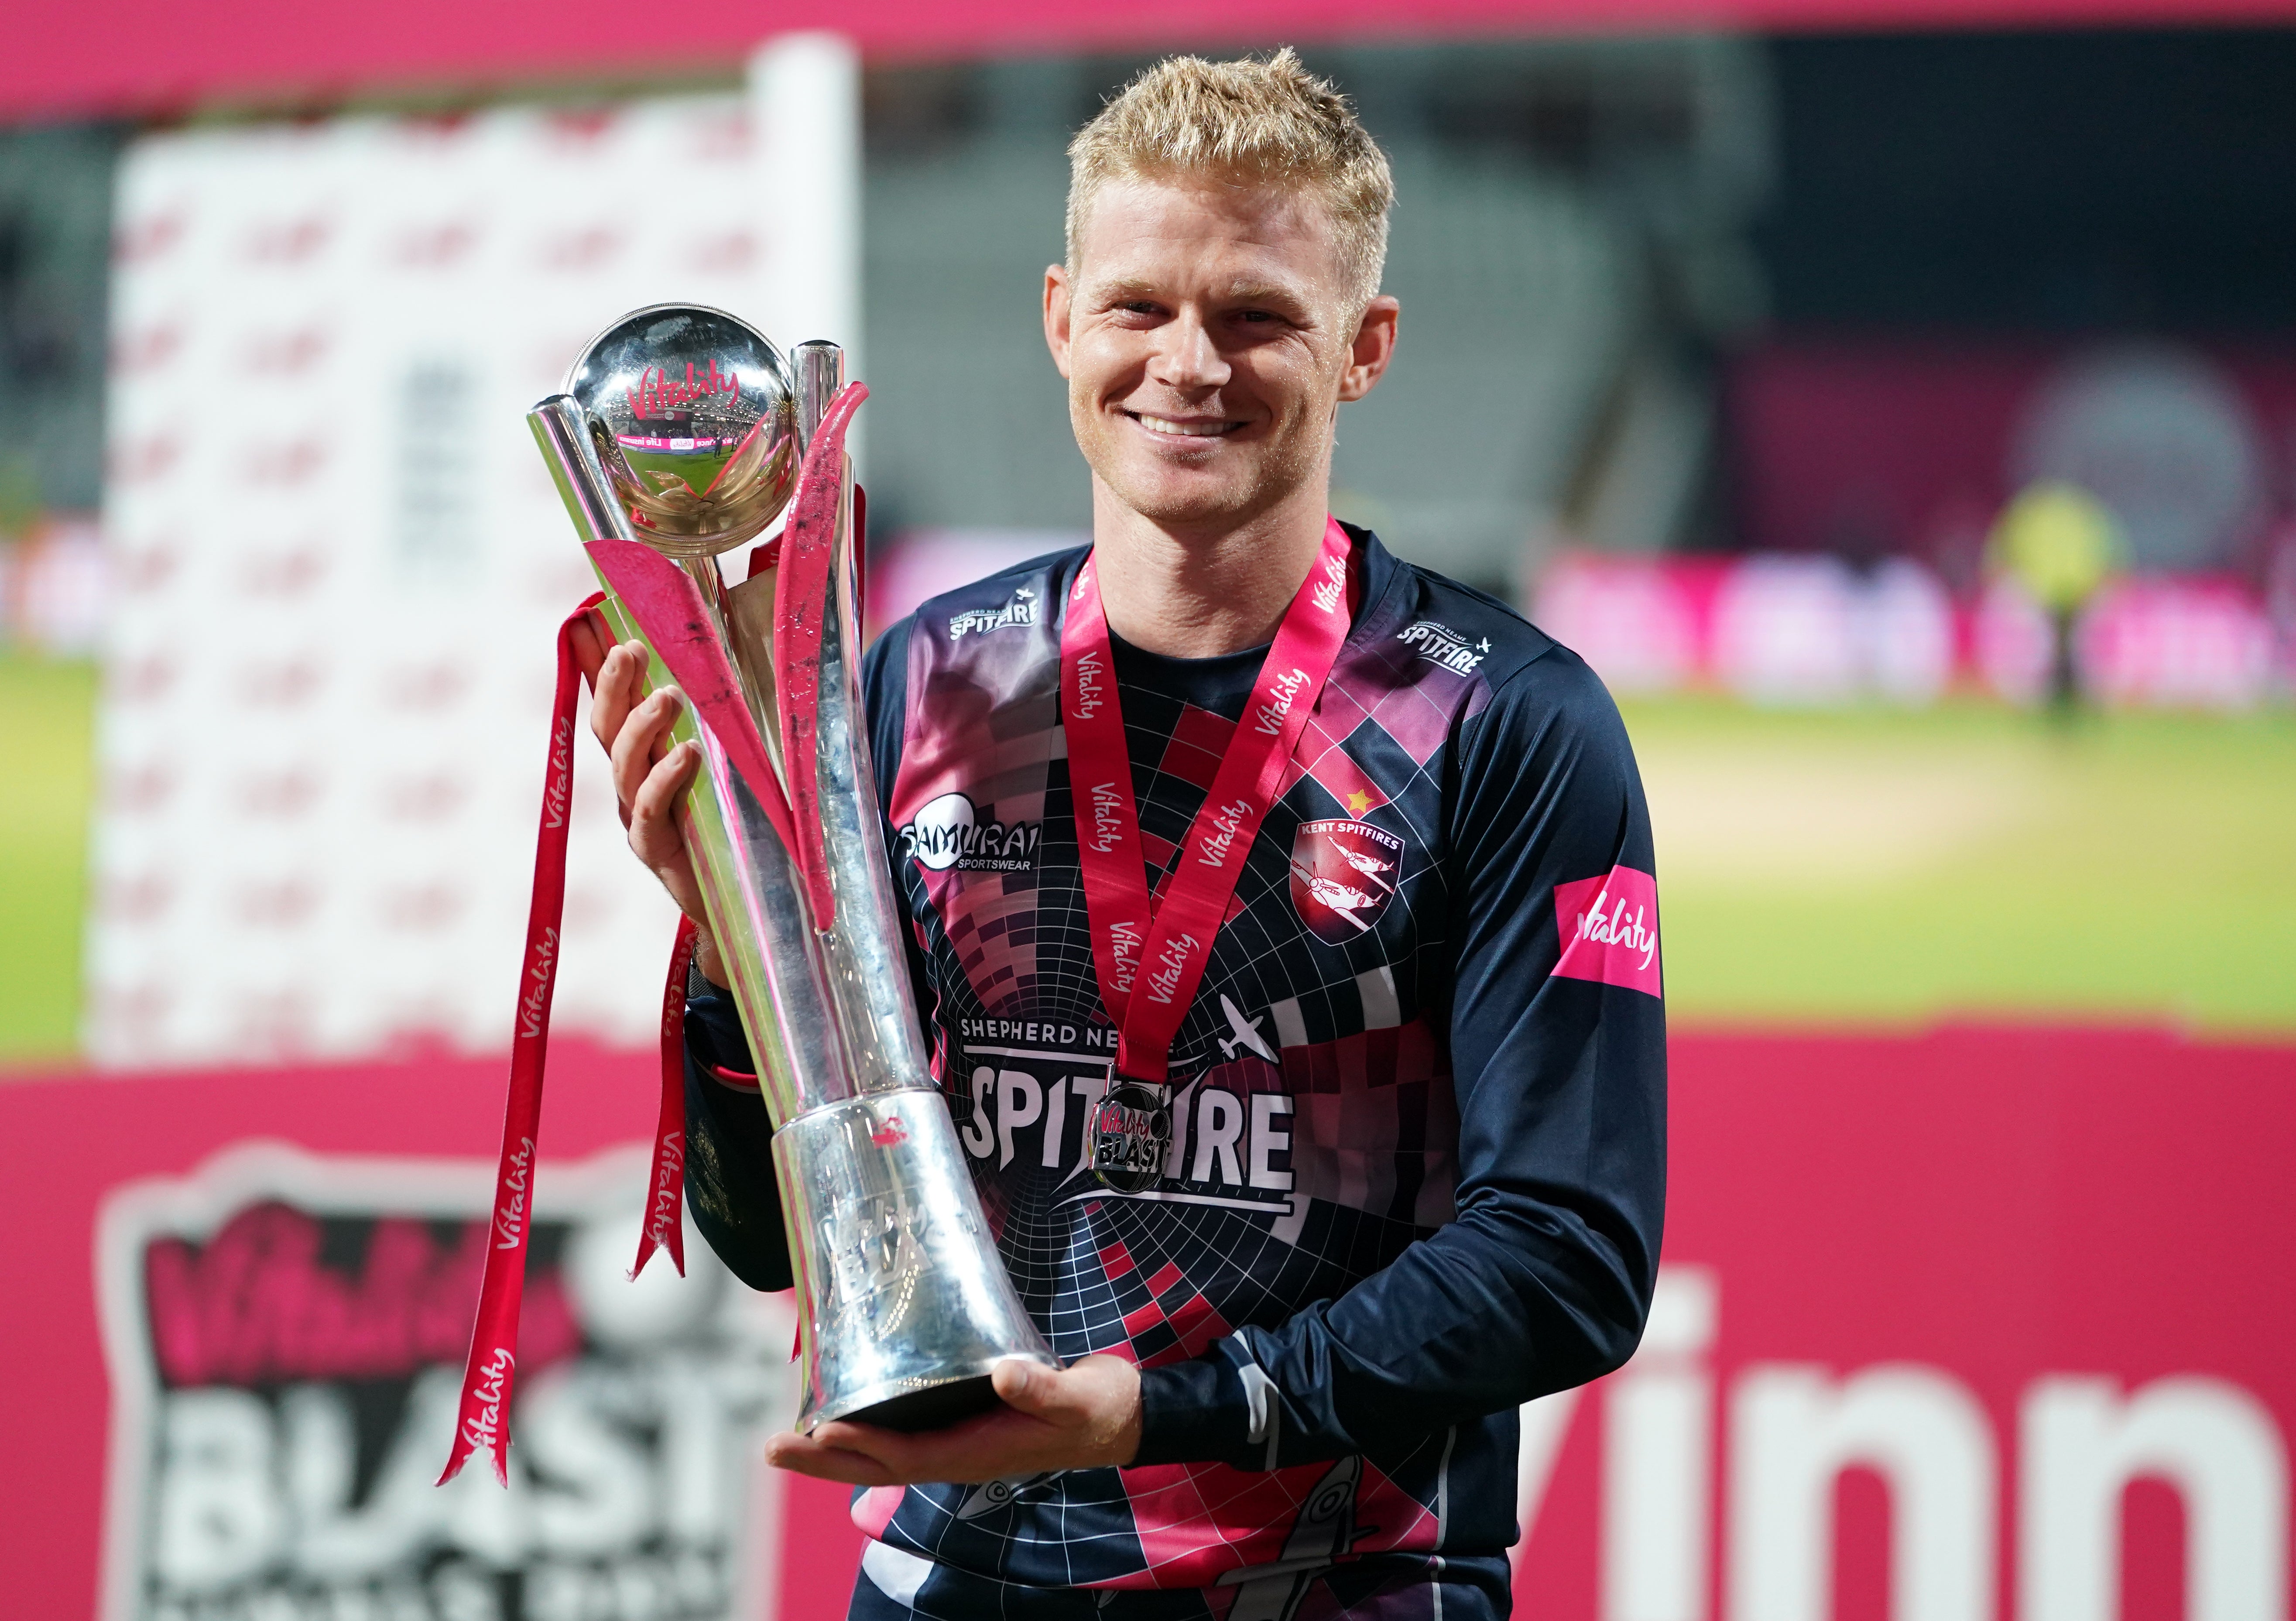 Billings captained Kent to the Vitality Blast title last year (Mike Egerton/PA)